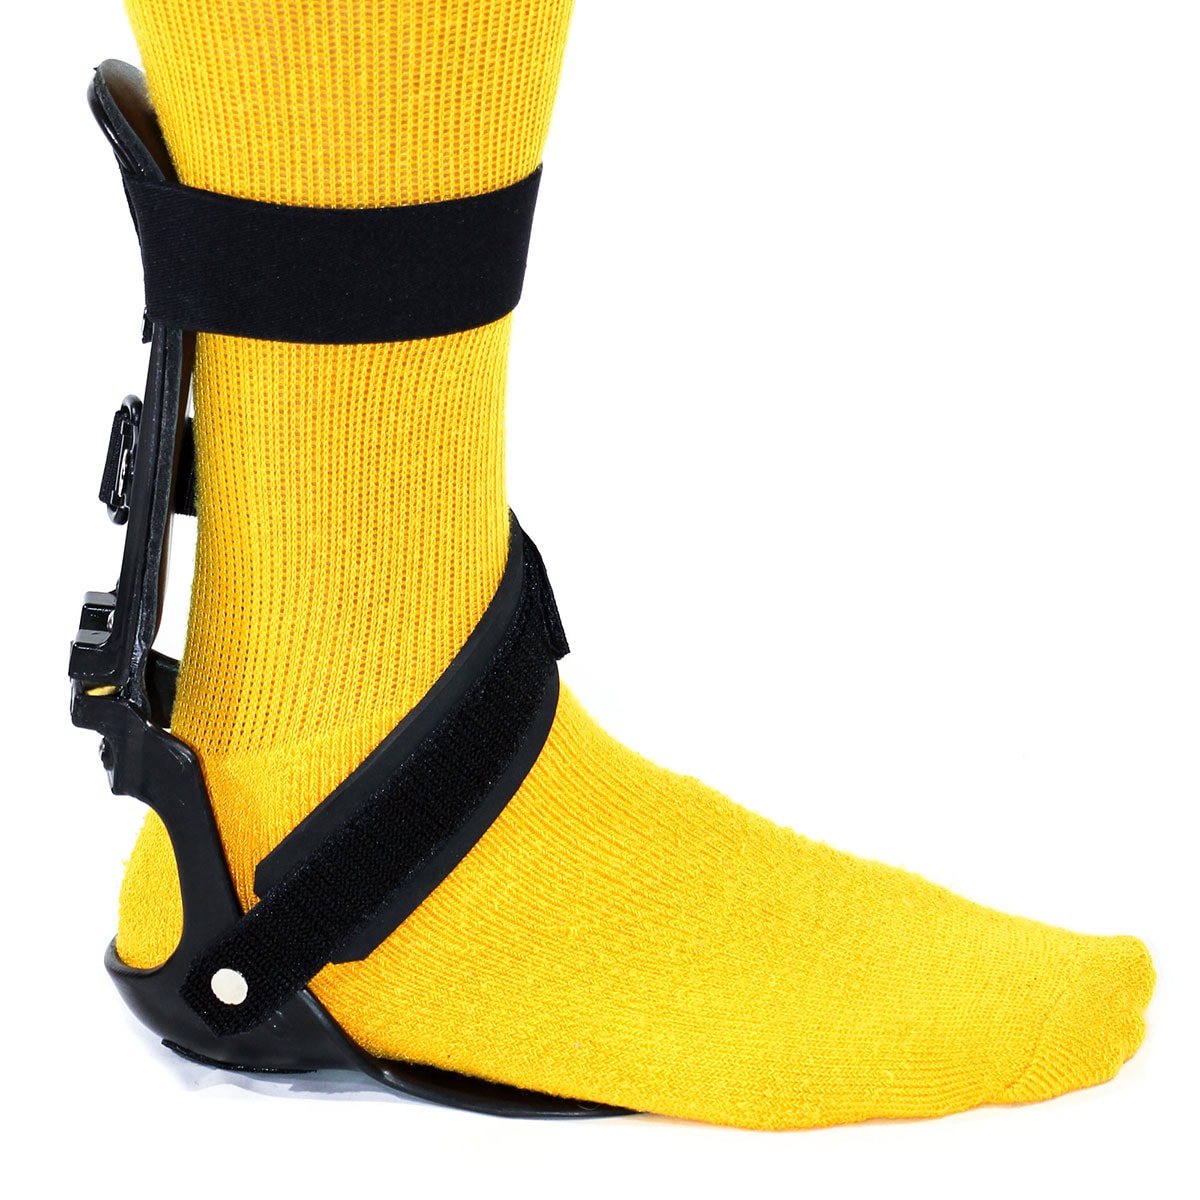 Step-Smart is an AFO Foot Brace solution for Drop Foot